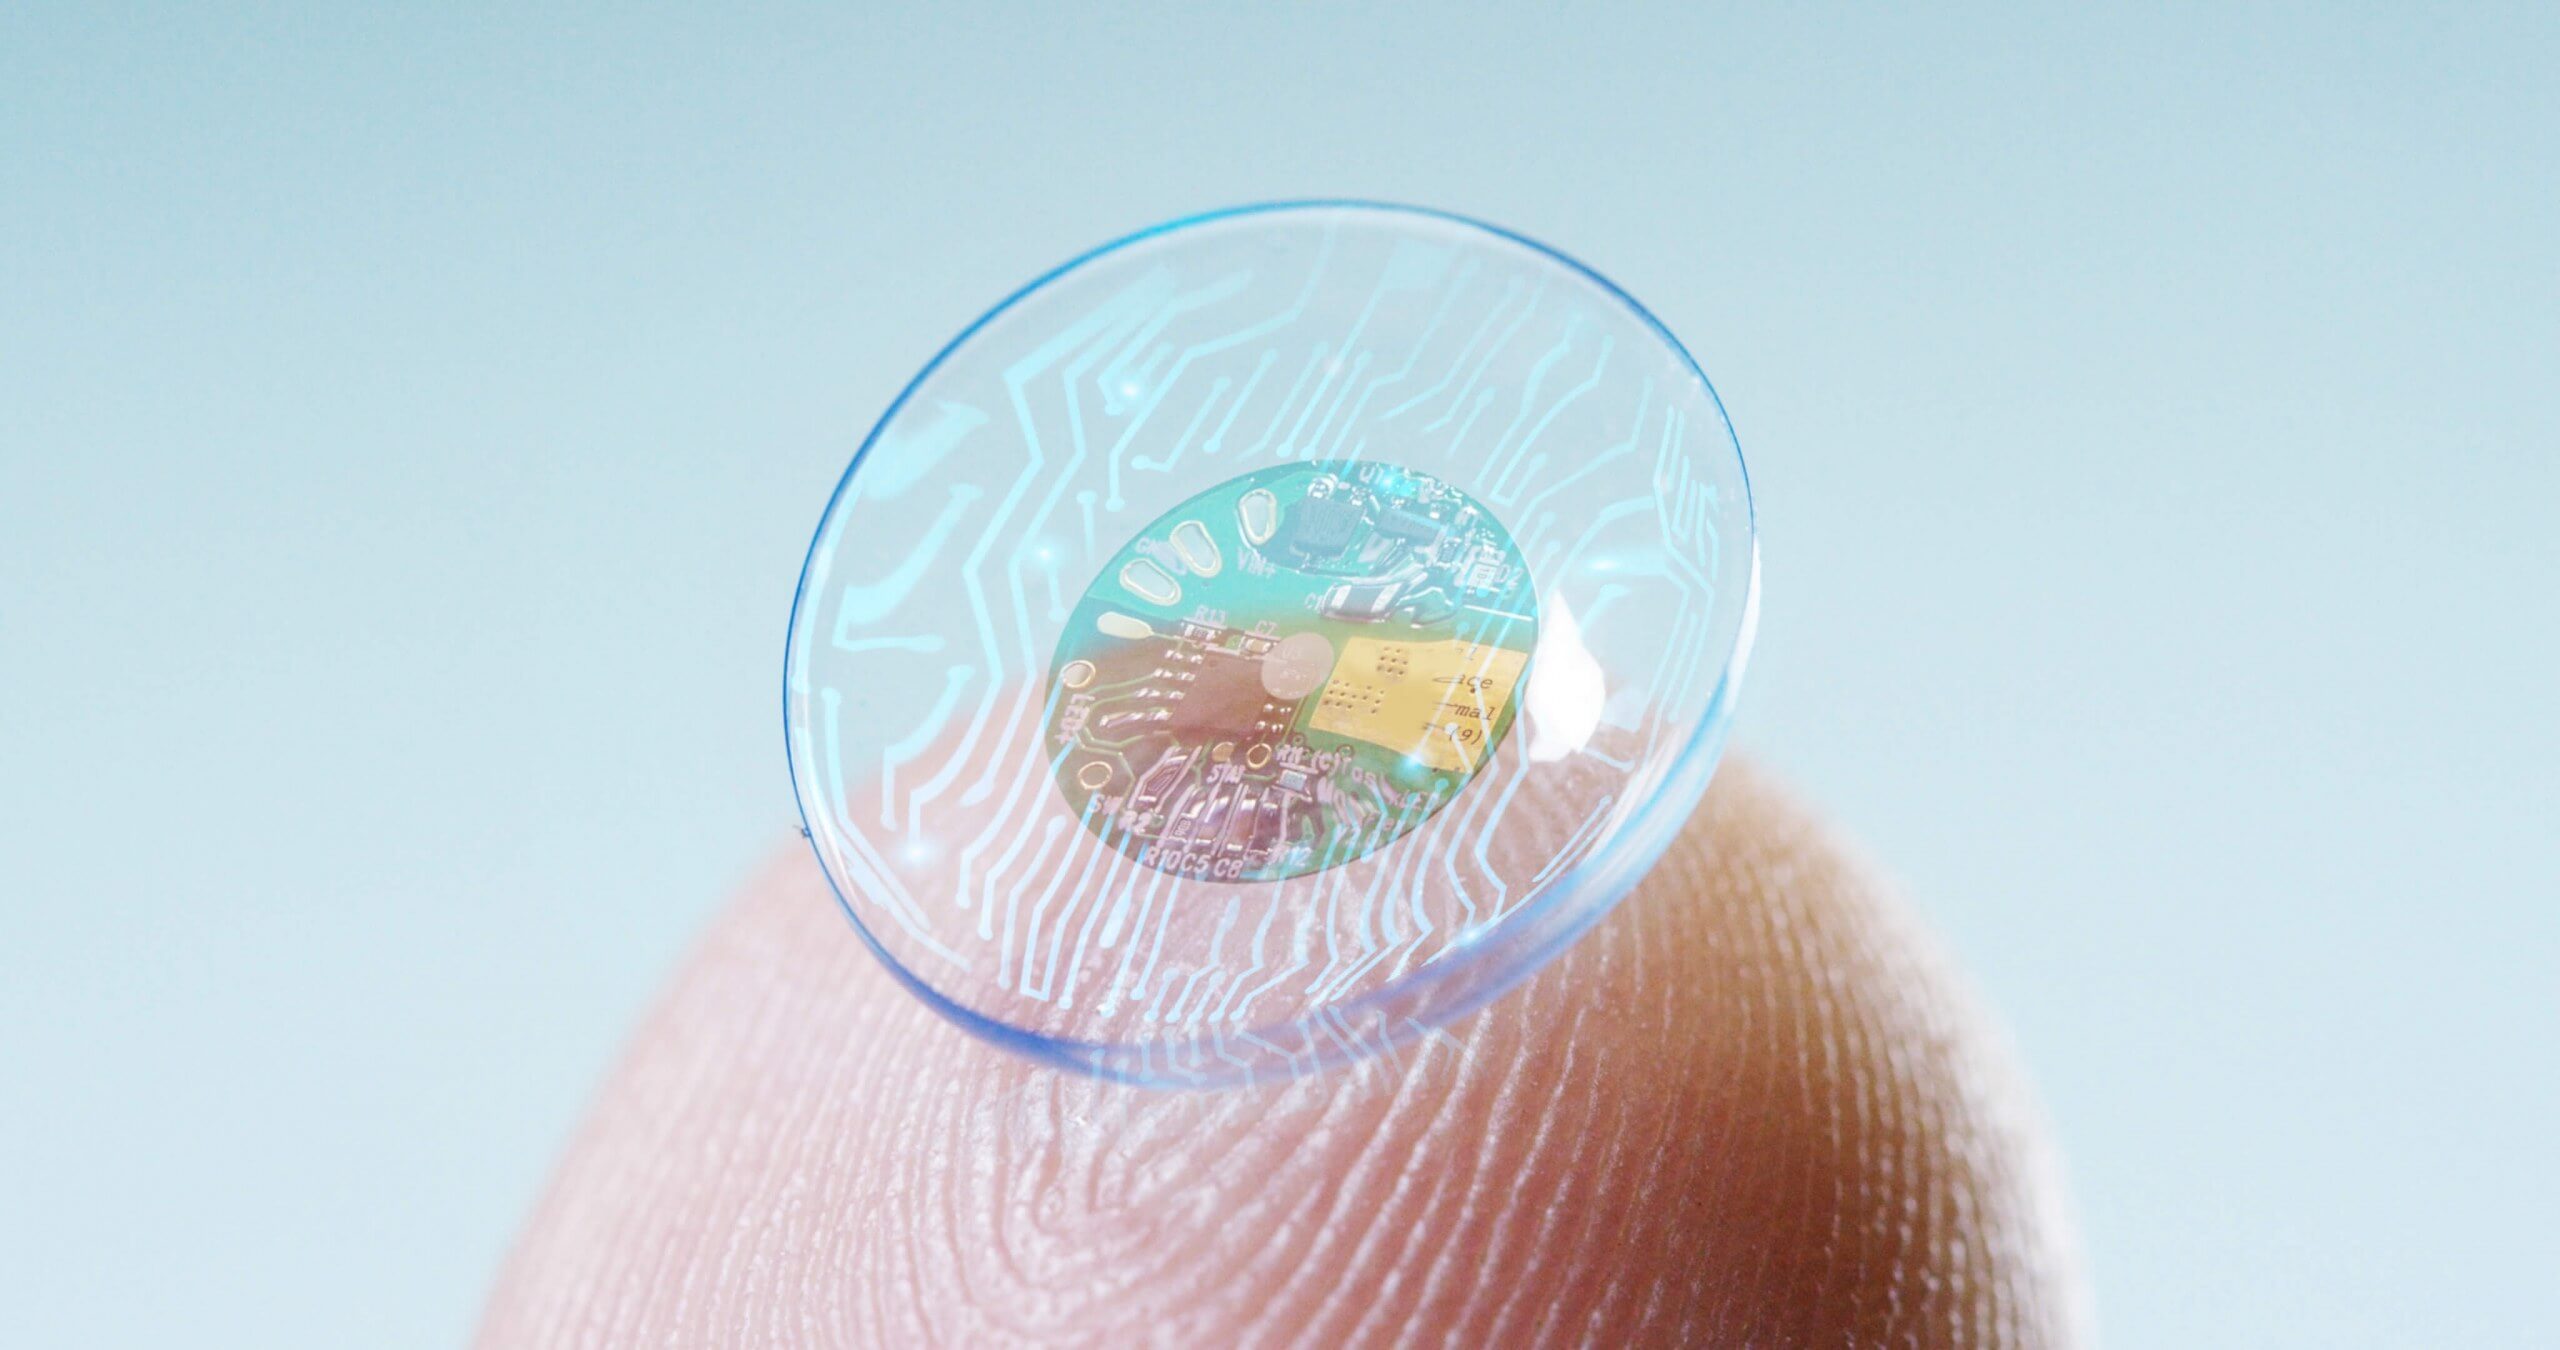 Mojo Vision is working on a contact lens with an embedded 14,000ppi display